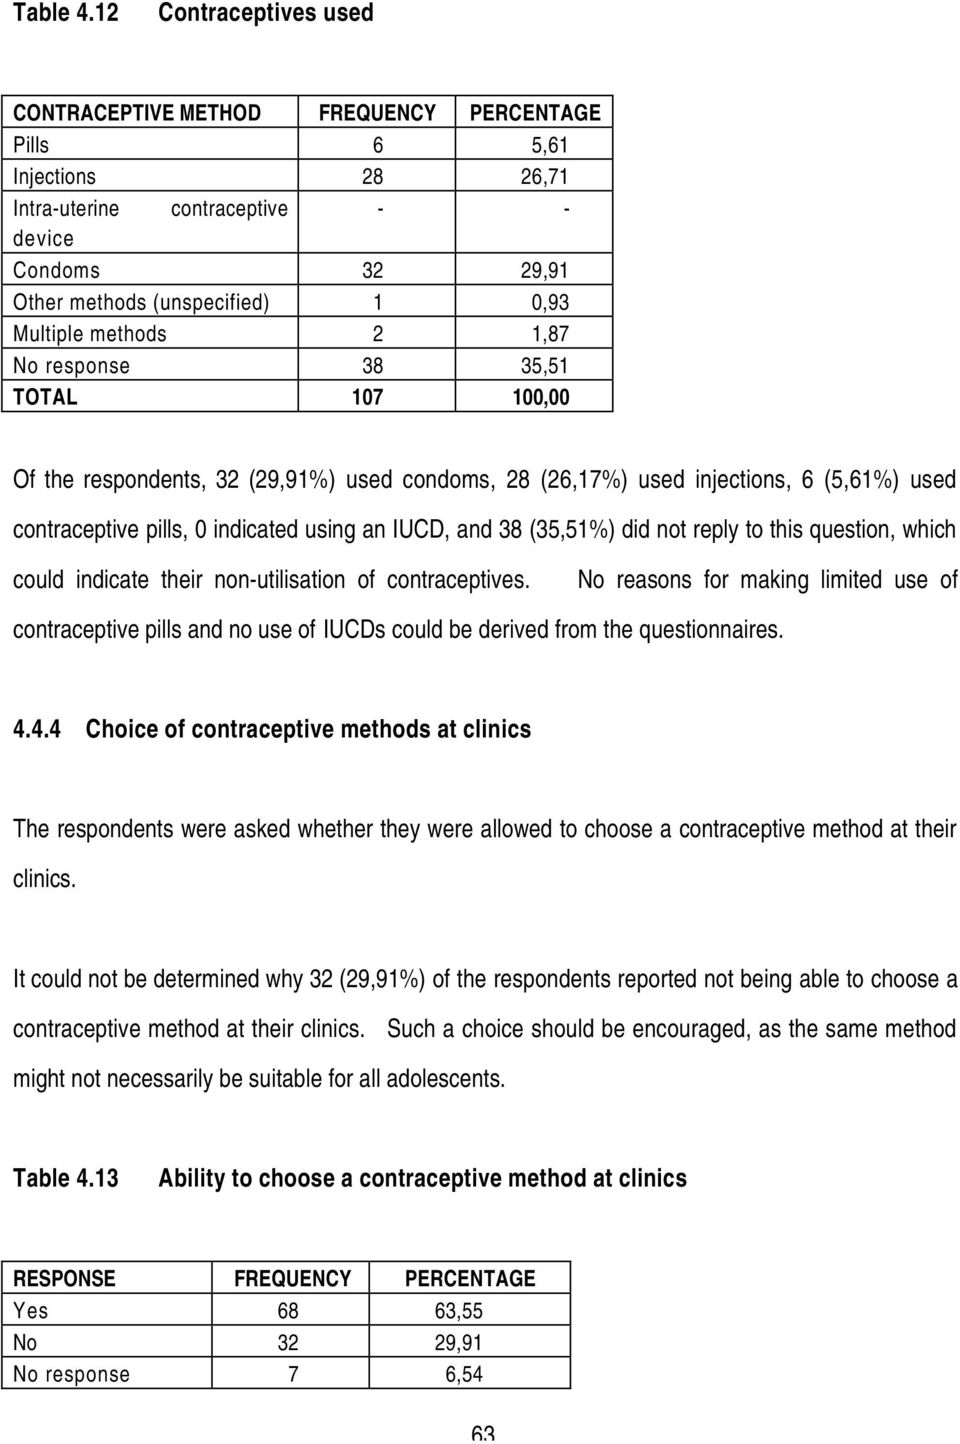 methods 2 1,87 No response 38 35,51 Of the respondents, 32 (29,91%) used condoms, 28 (26,17%) used injections, 6 (5,61%) used contraceptive pills, 0 indicated using an IUCD, and 38 (35,51%) did not